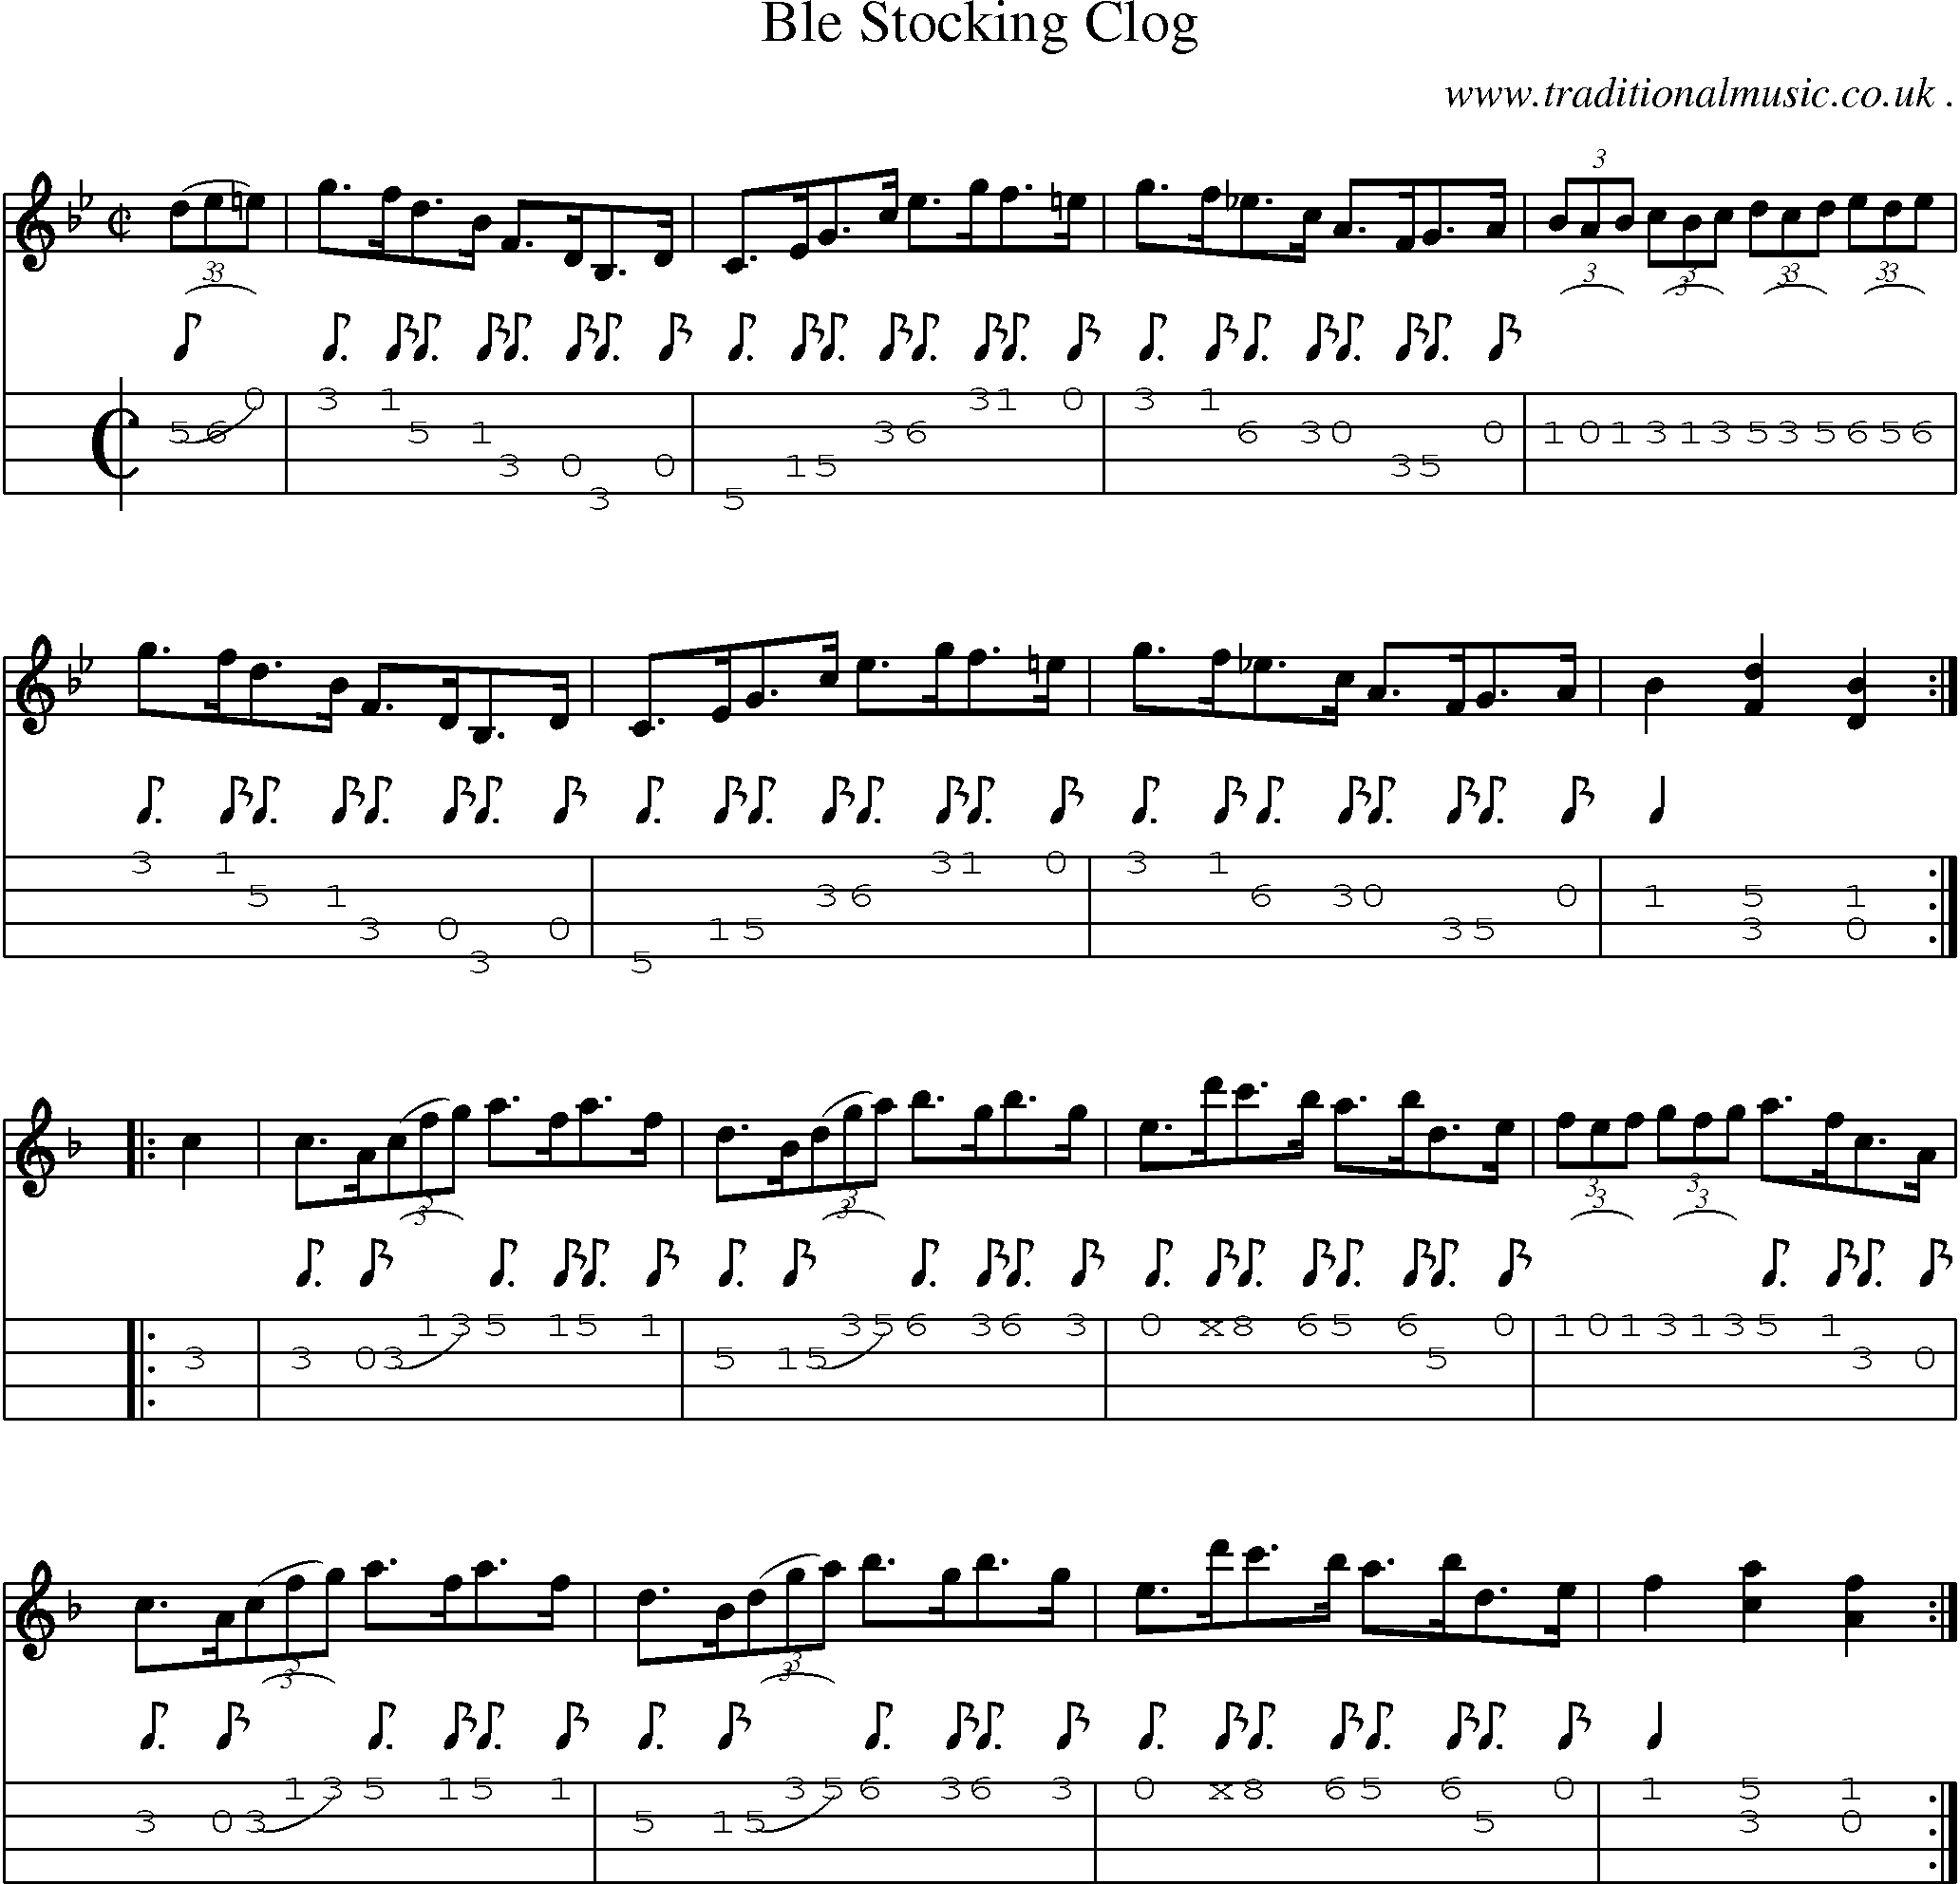 Sheet-Music and Mandolin Tabs for Ble Stocking Clog